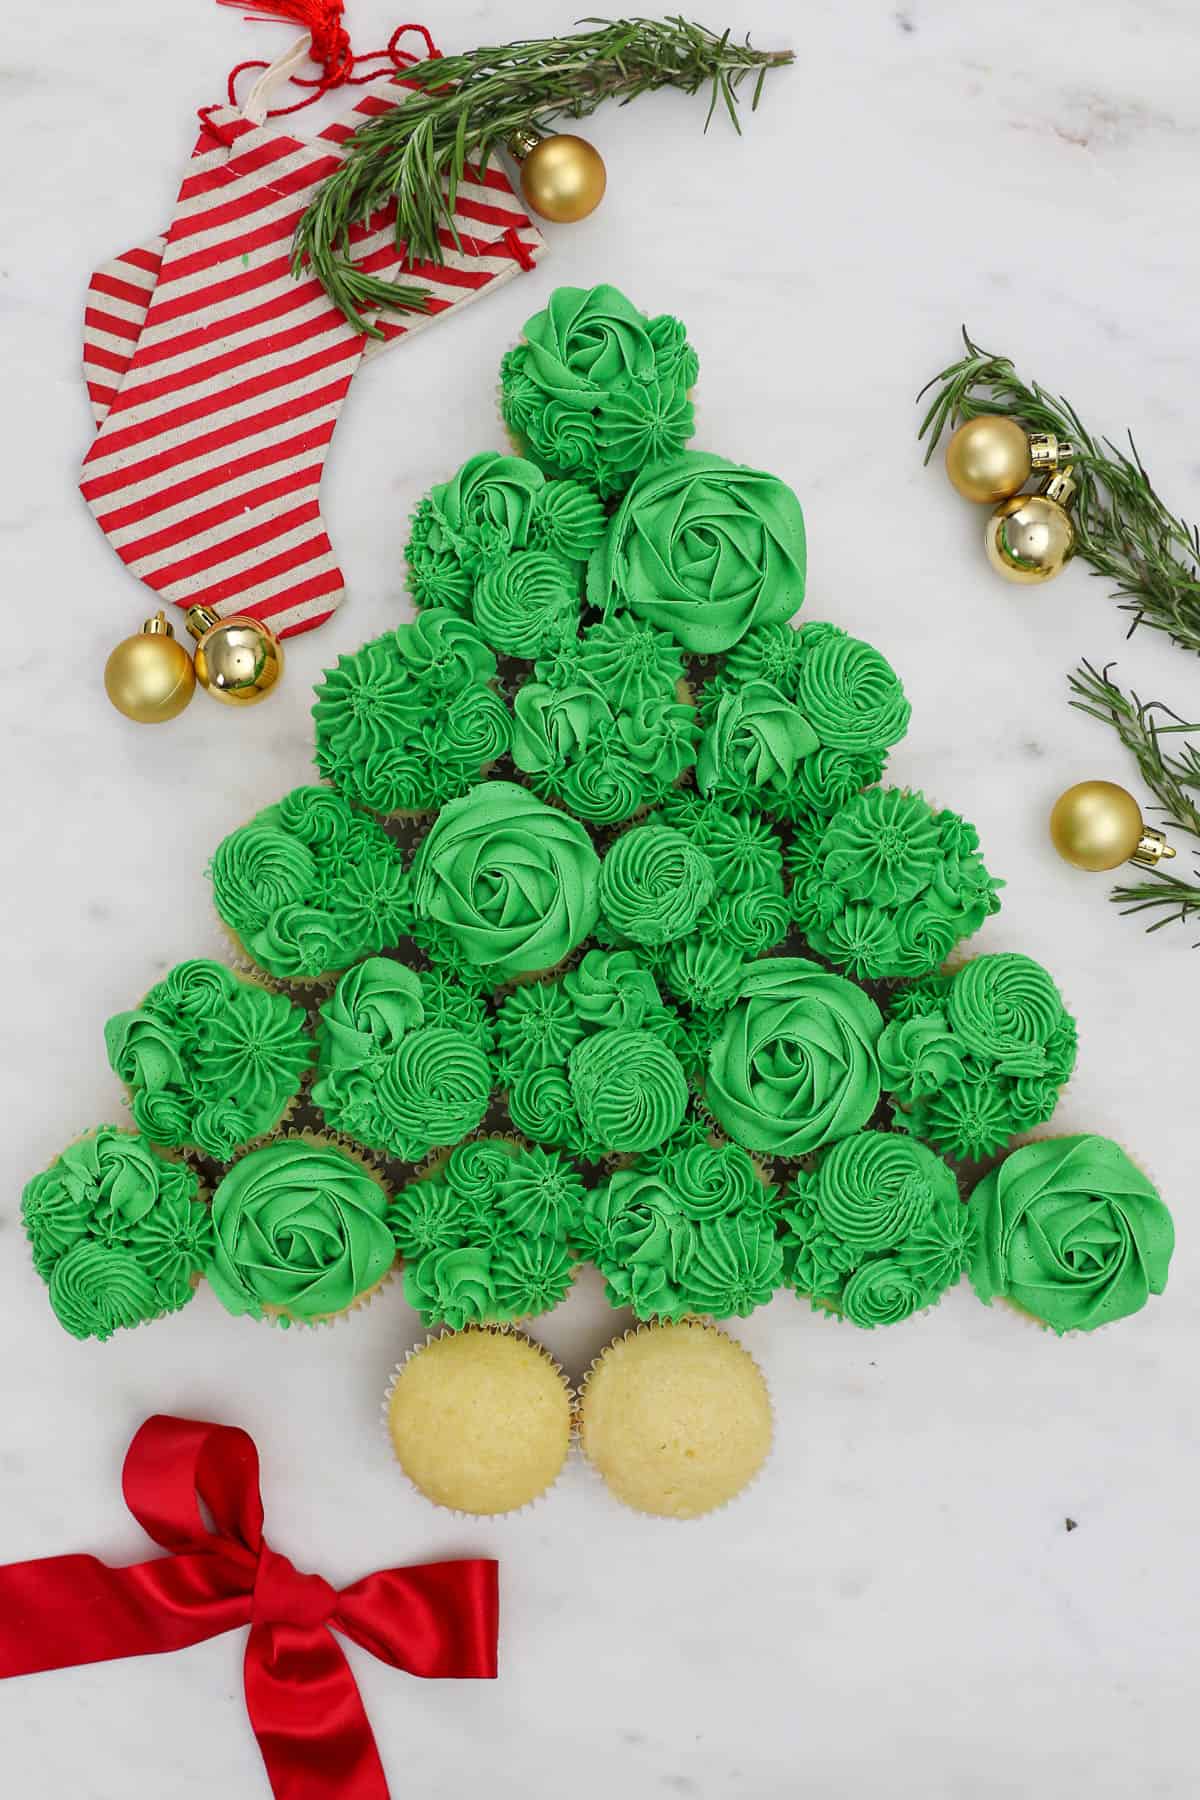 A fully assembled Christmas tree cake with all of the buttercream added